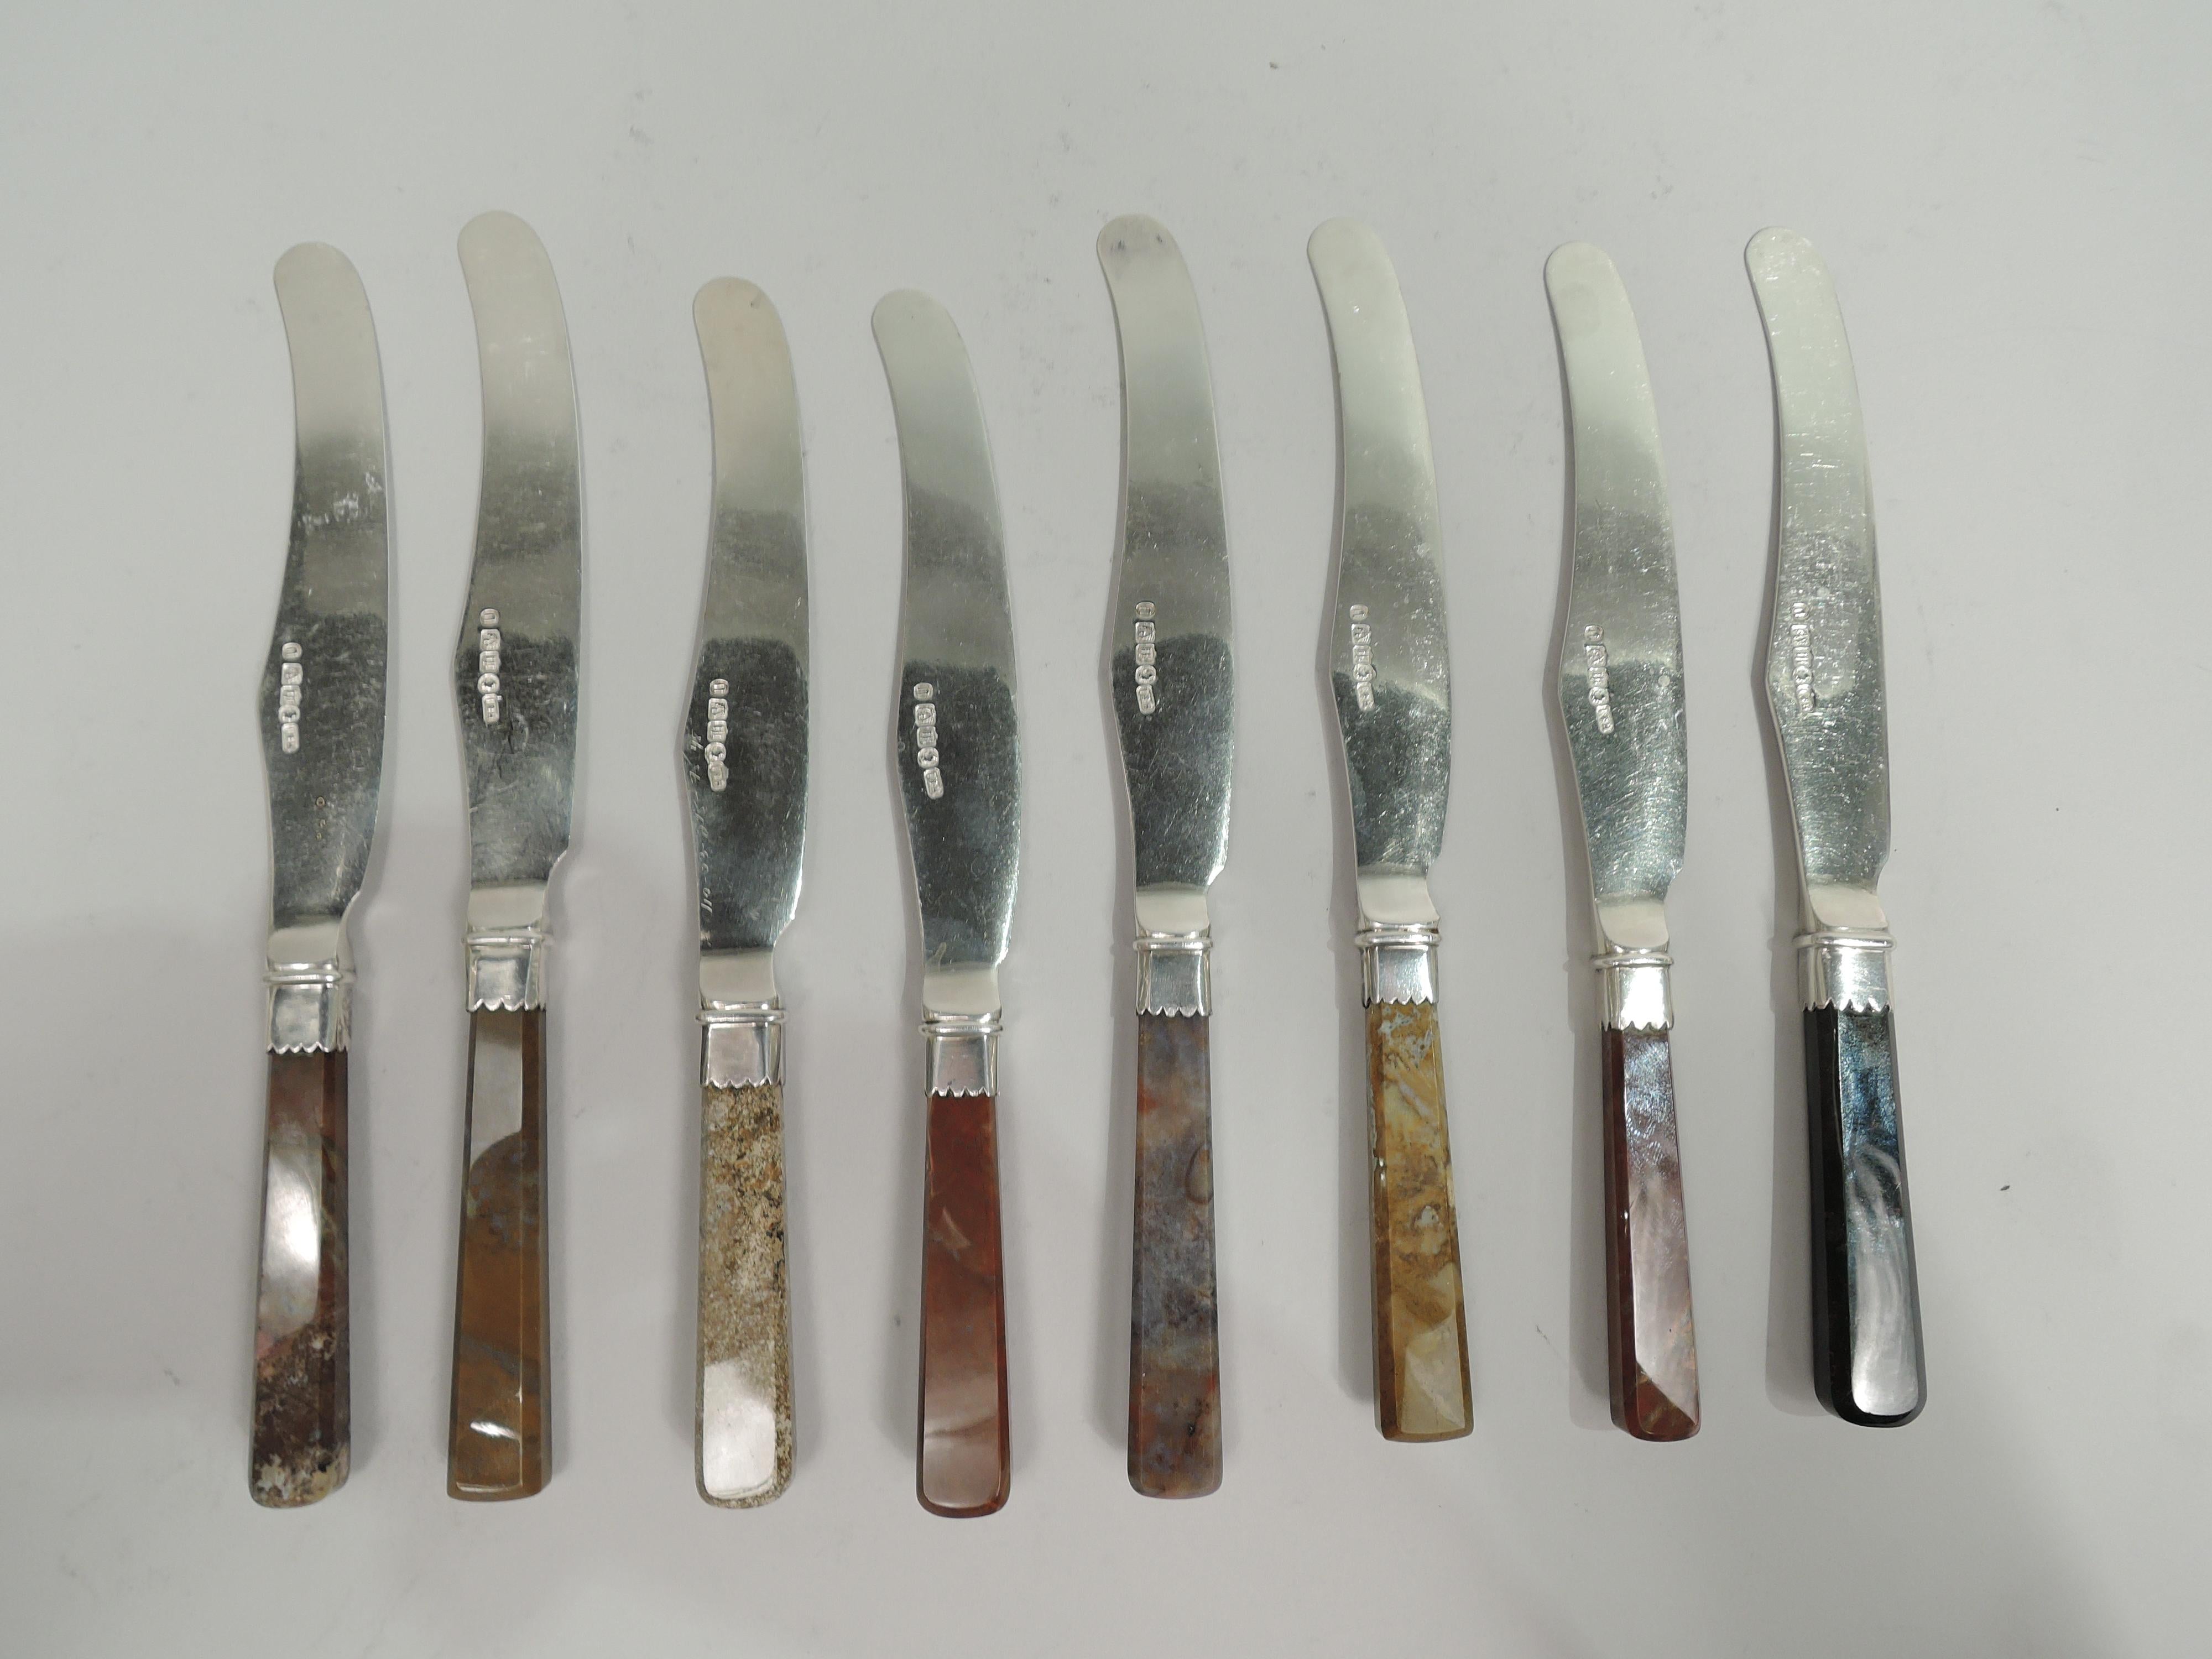 Scottish Victorian sterling silver and agate fruit set. Made by Hamilton & Inches in Edinburgh in 1876. This set comprises 8 knives and 7 forks. Each: Tapering and chamfered rectilinear handle in mottled and granulated agate in different colors.